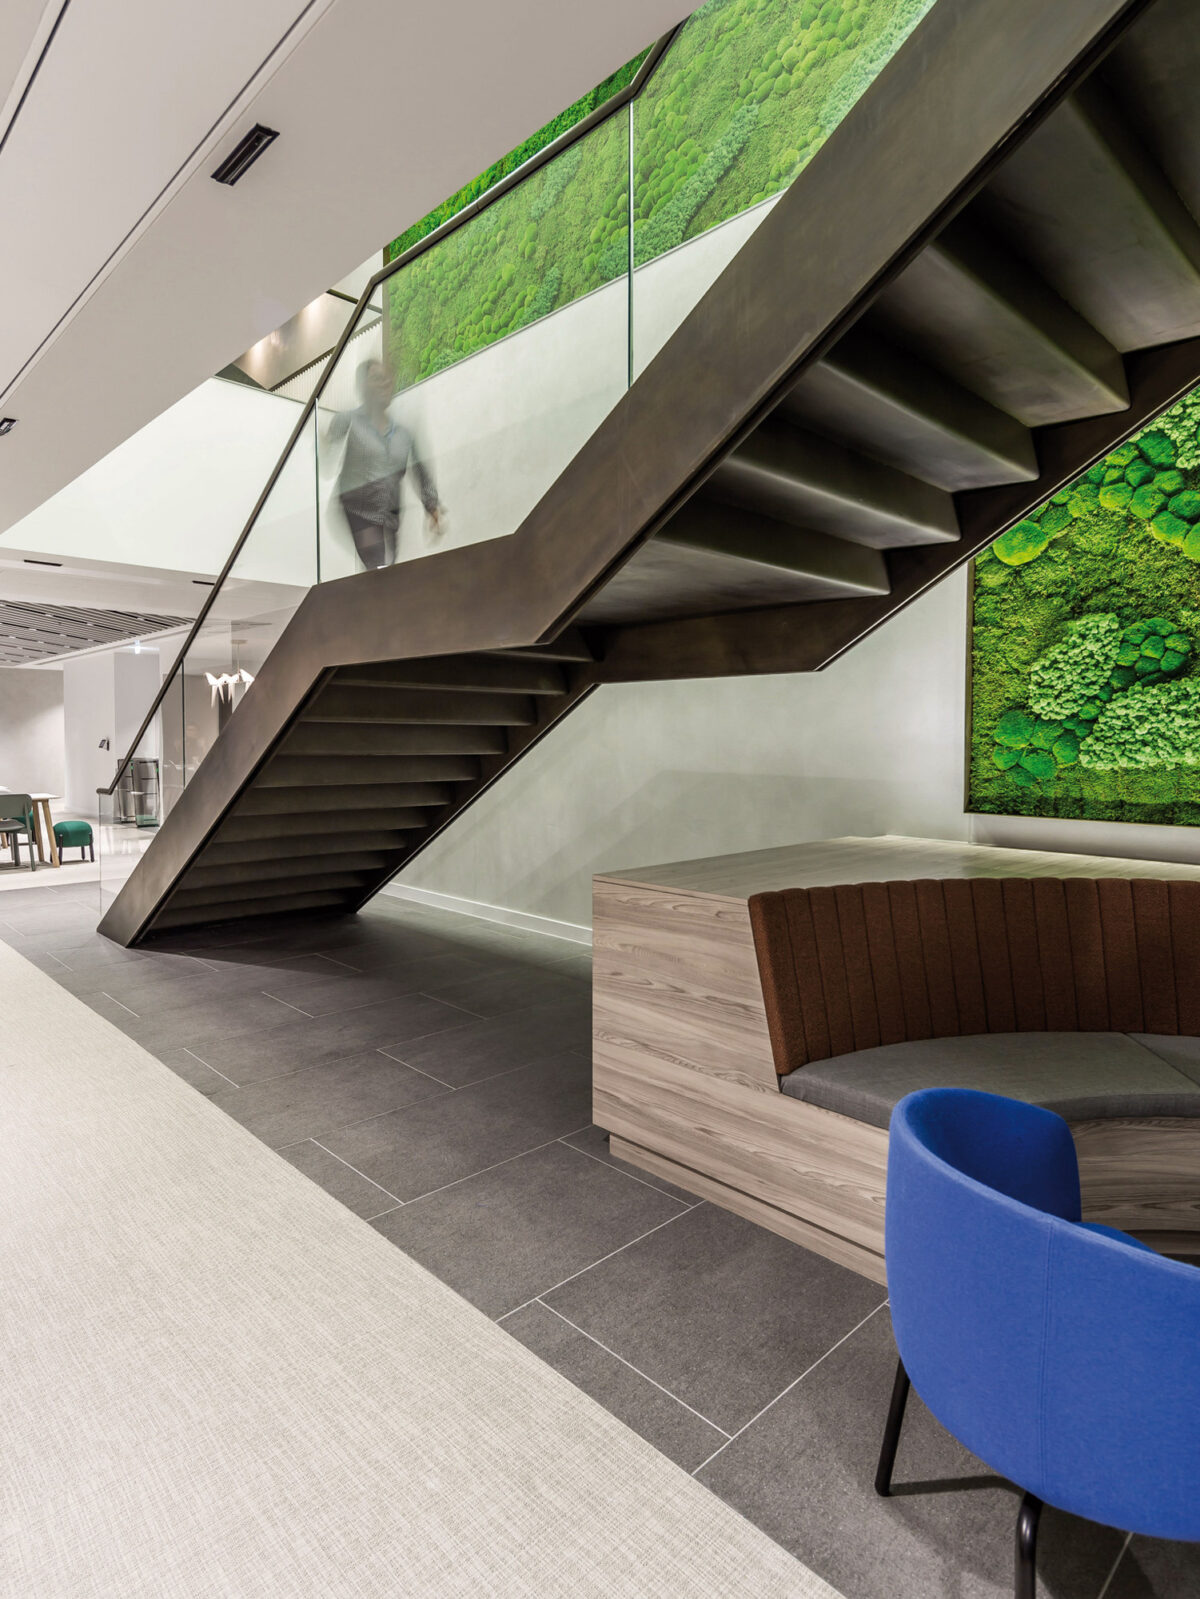 Sleek modern office space featuring a floating staircase with glass balustrades adjacent to a vibrant green living wall. Wooden bench seating and a pop of color from a blue armchair create a welcoming break area.